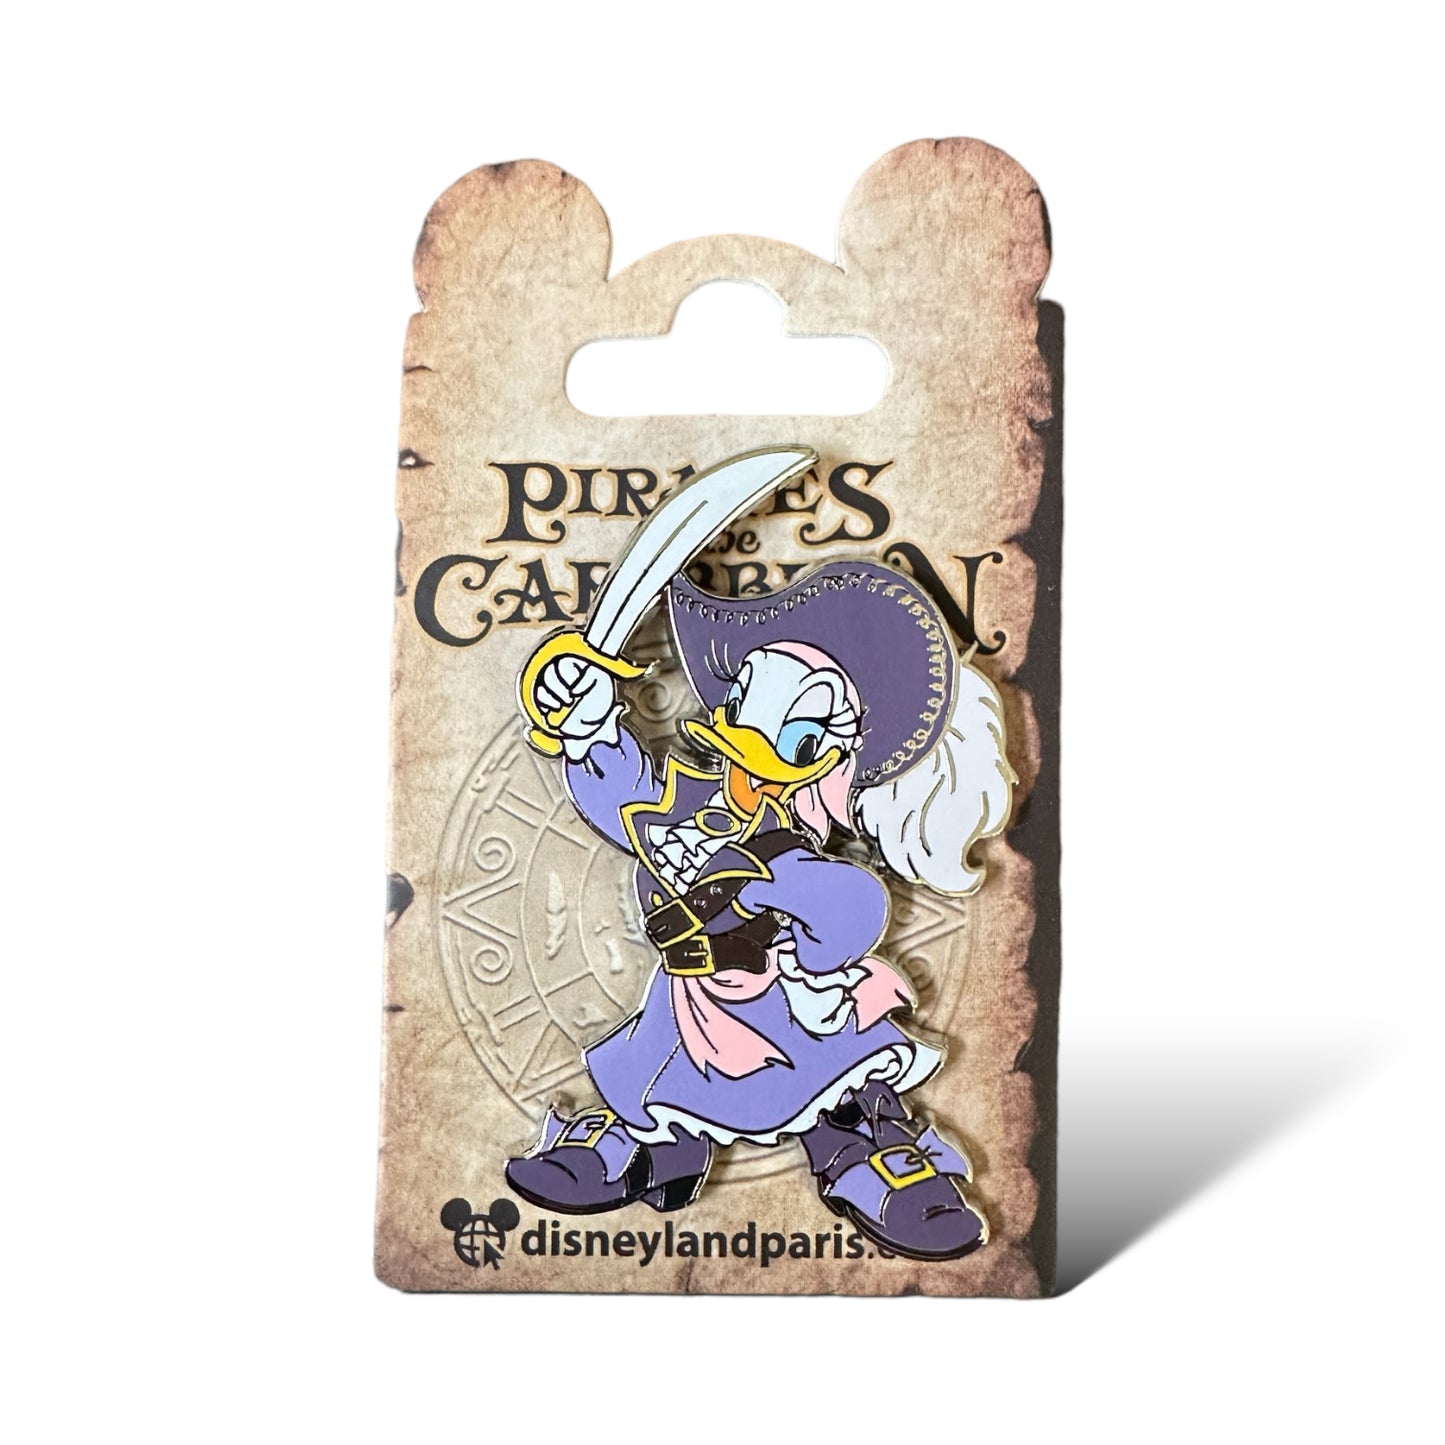 DLRP Minnie and Daisy Attractions Daisy Pirates of The Caribbean Pin